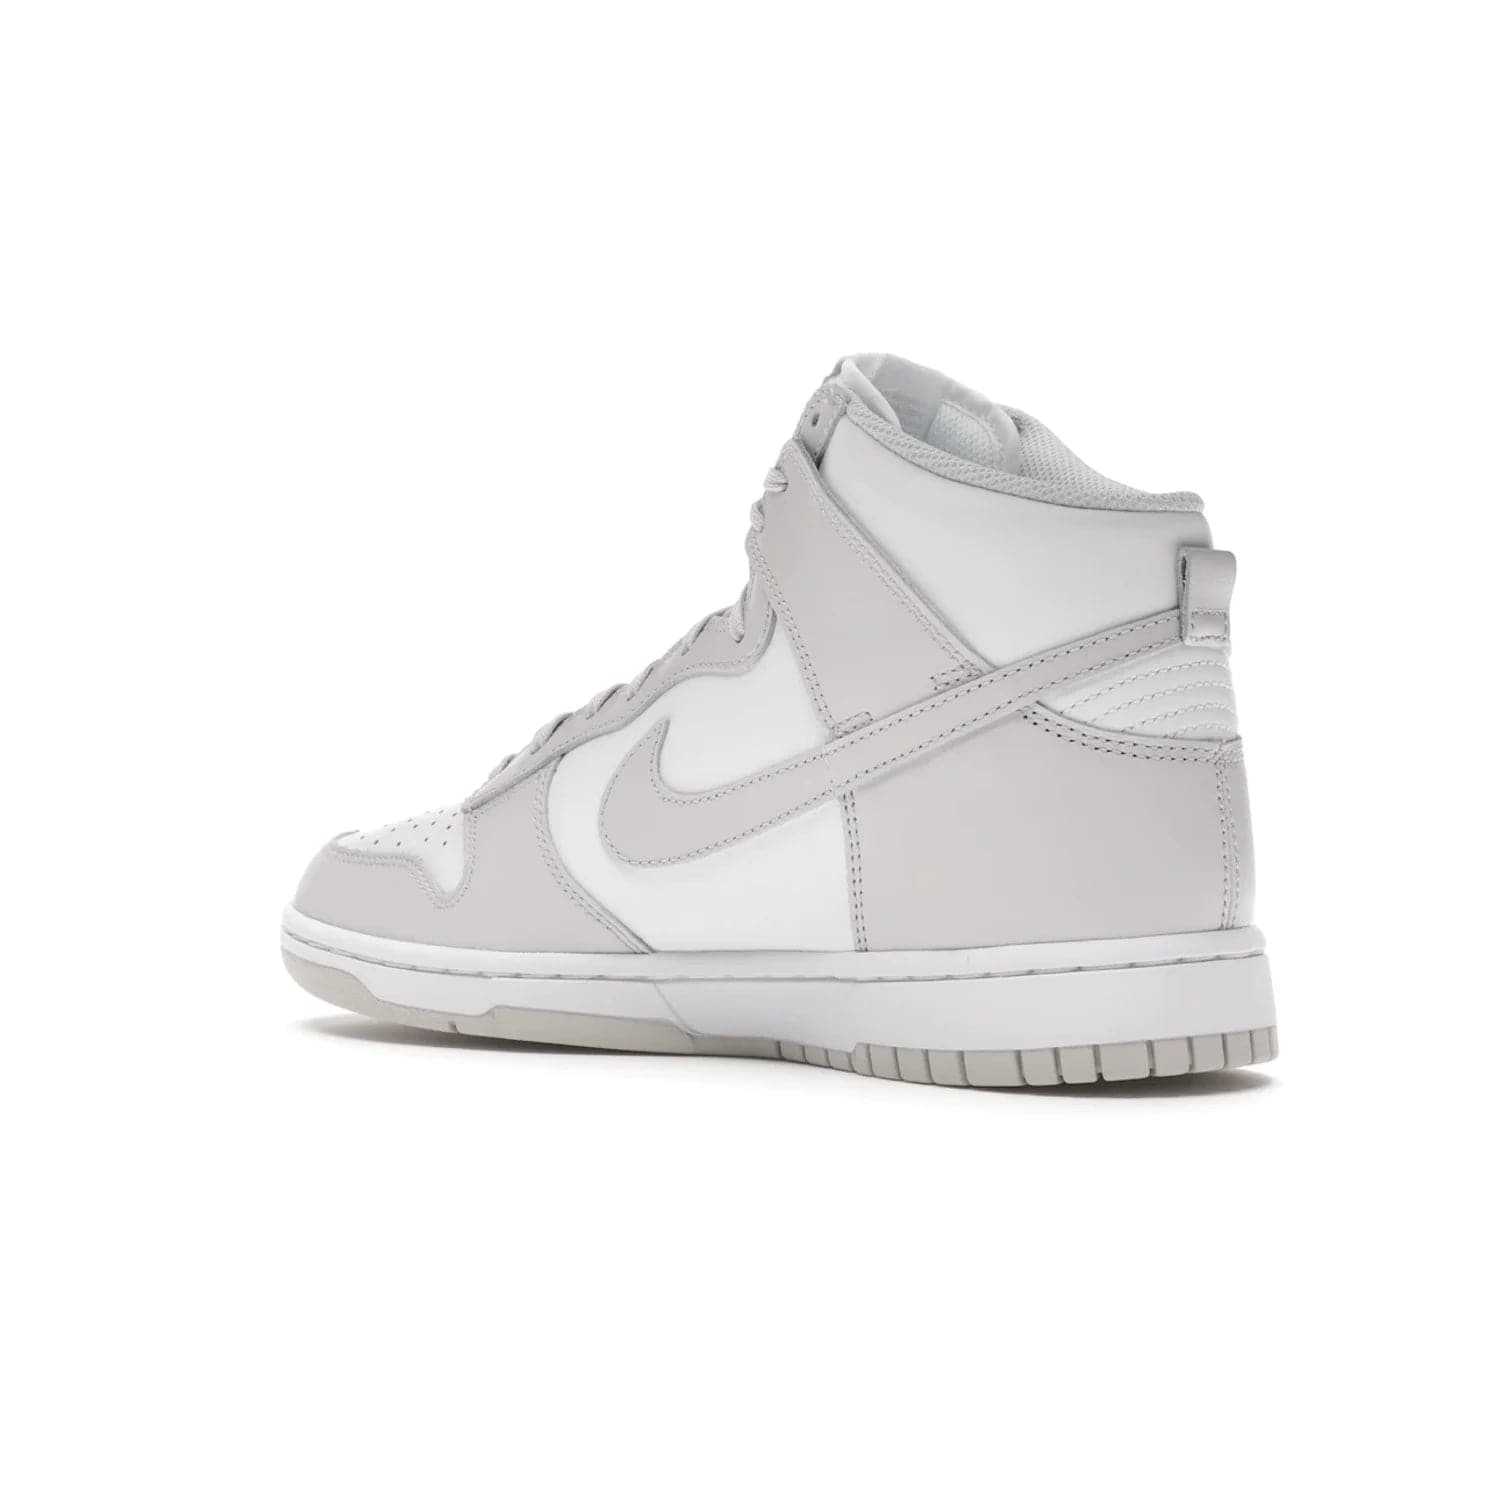 Nike Dunk High Retro White Vast Grey (2021) - Image 23 - Only at www.BallersClubKickz.com - Nike Dunk High Retro White Vast Grey 2021: classic '80s basketball sneaker with a crisp white base, grey overlays, midsole tooling and outsole. Dropped Feb. 2021.